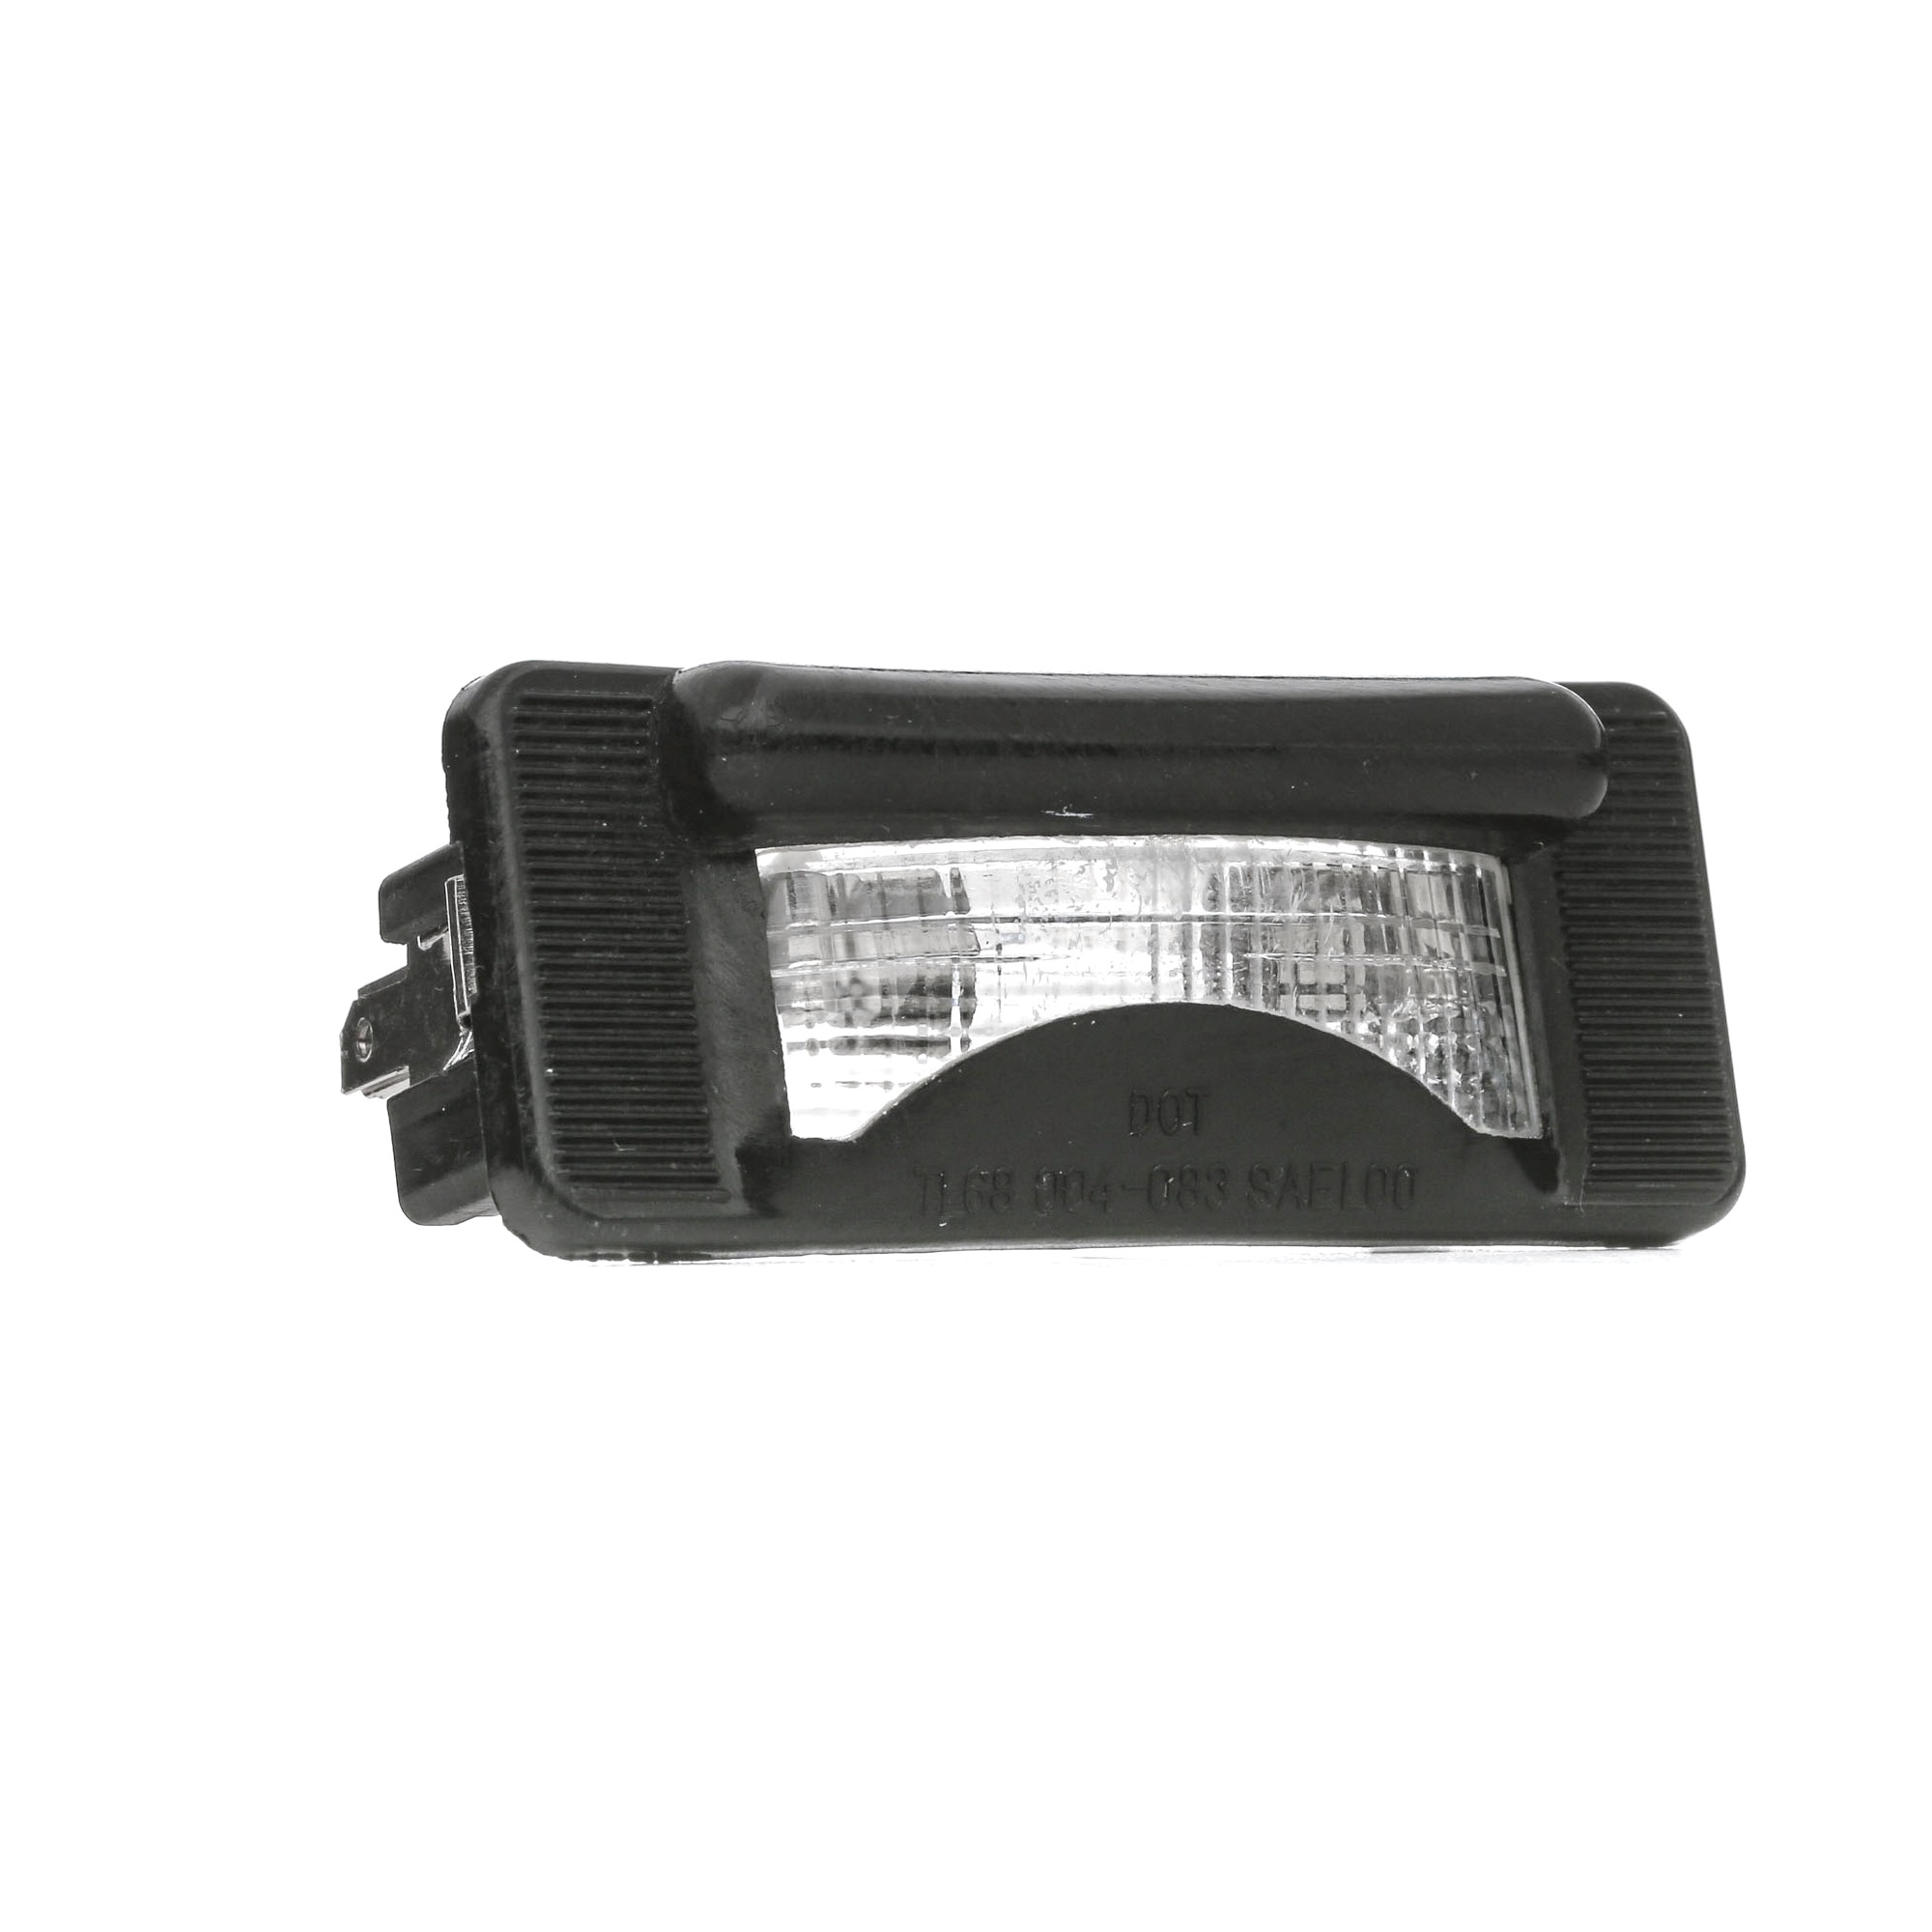 FAST FT87777 Licence Plate Light A 631 820 04 56